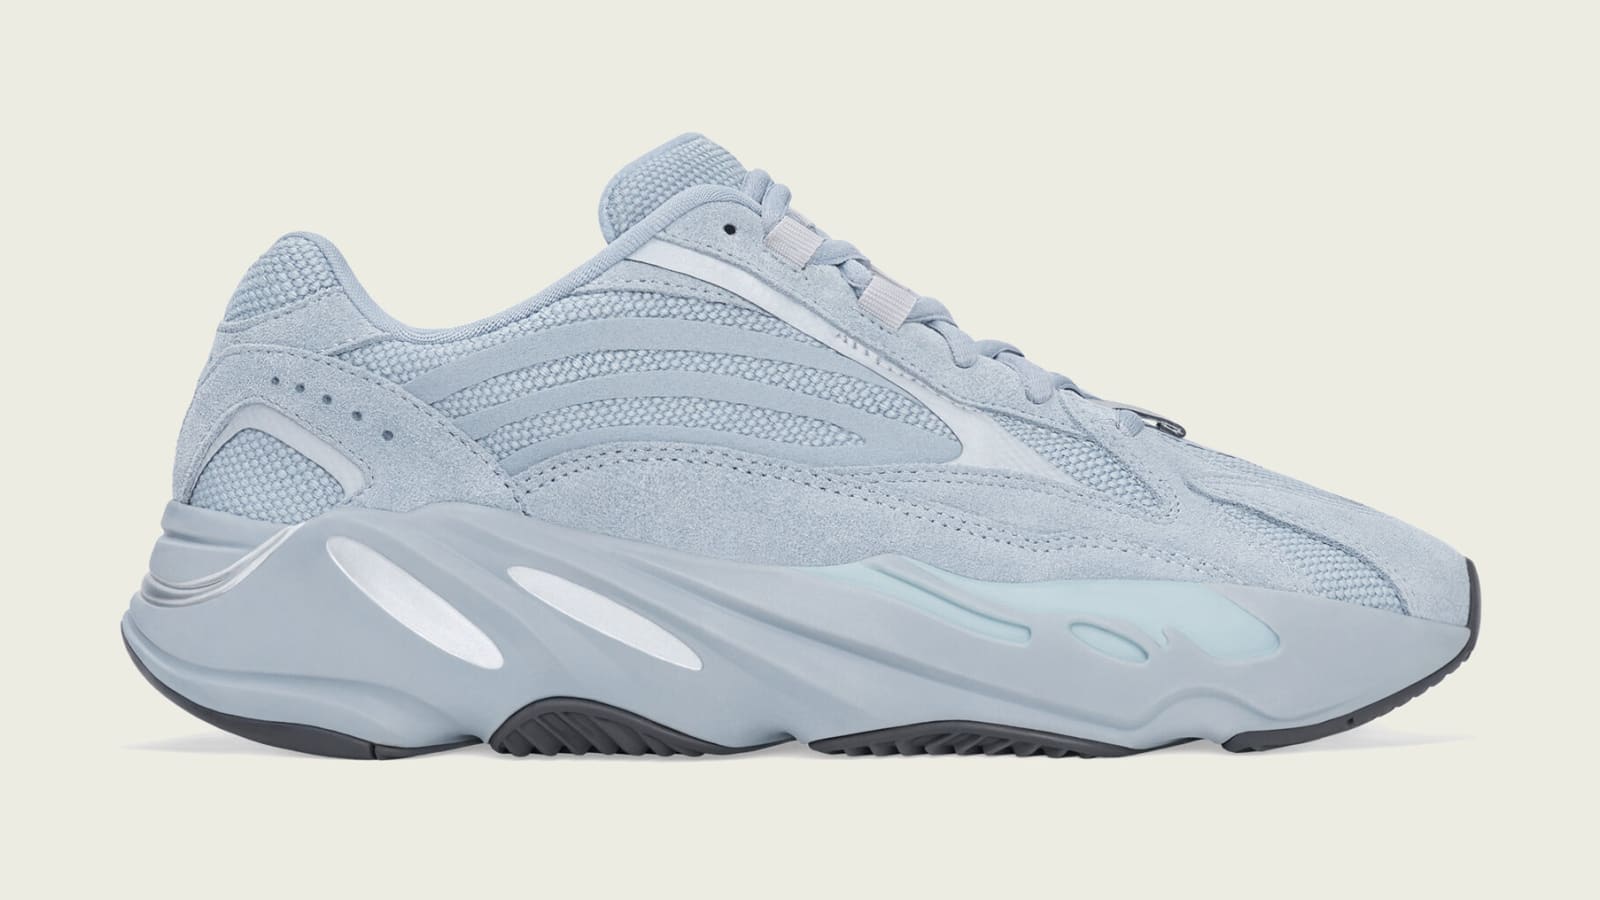 Adidas Yeezy Boost 700 V2 &quot;Hospital Blue&quot; Release Details, Official Photos